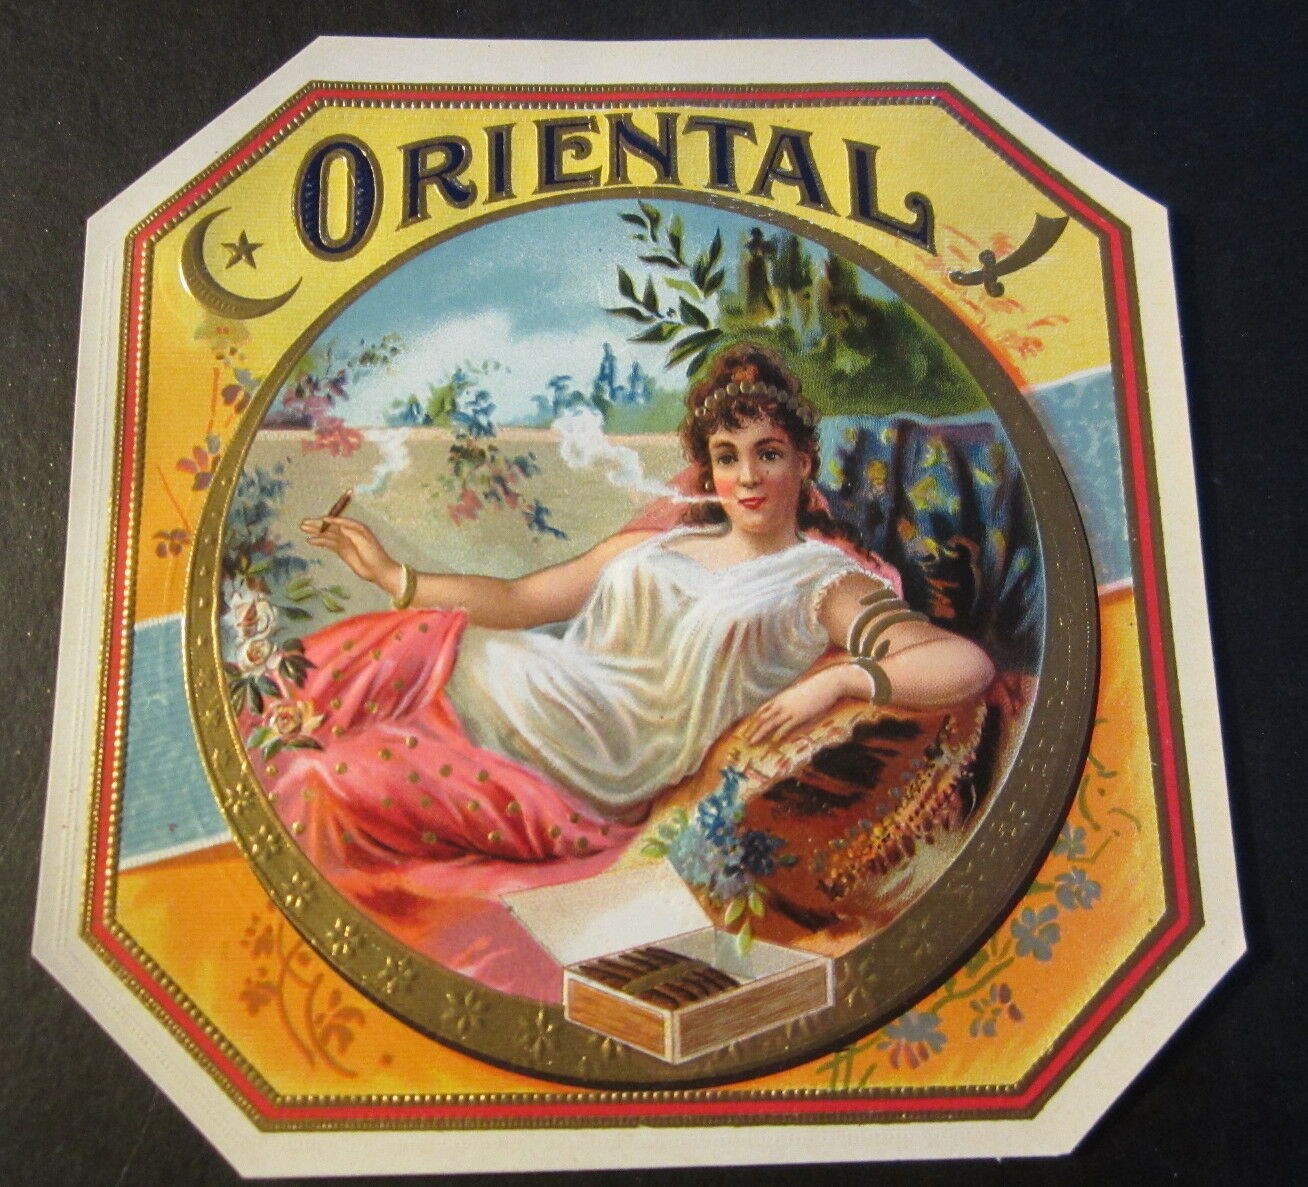  Old Antique - ORIENTAL - Outer CIGAR BOX LABEL...